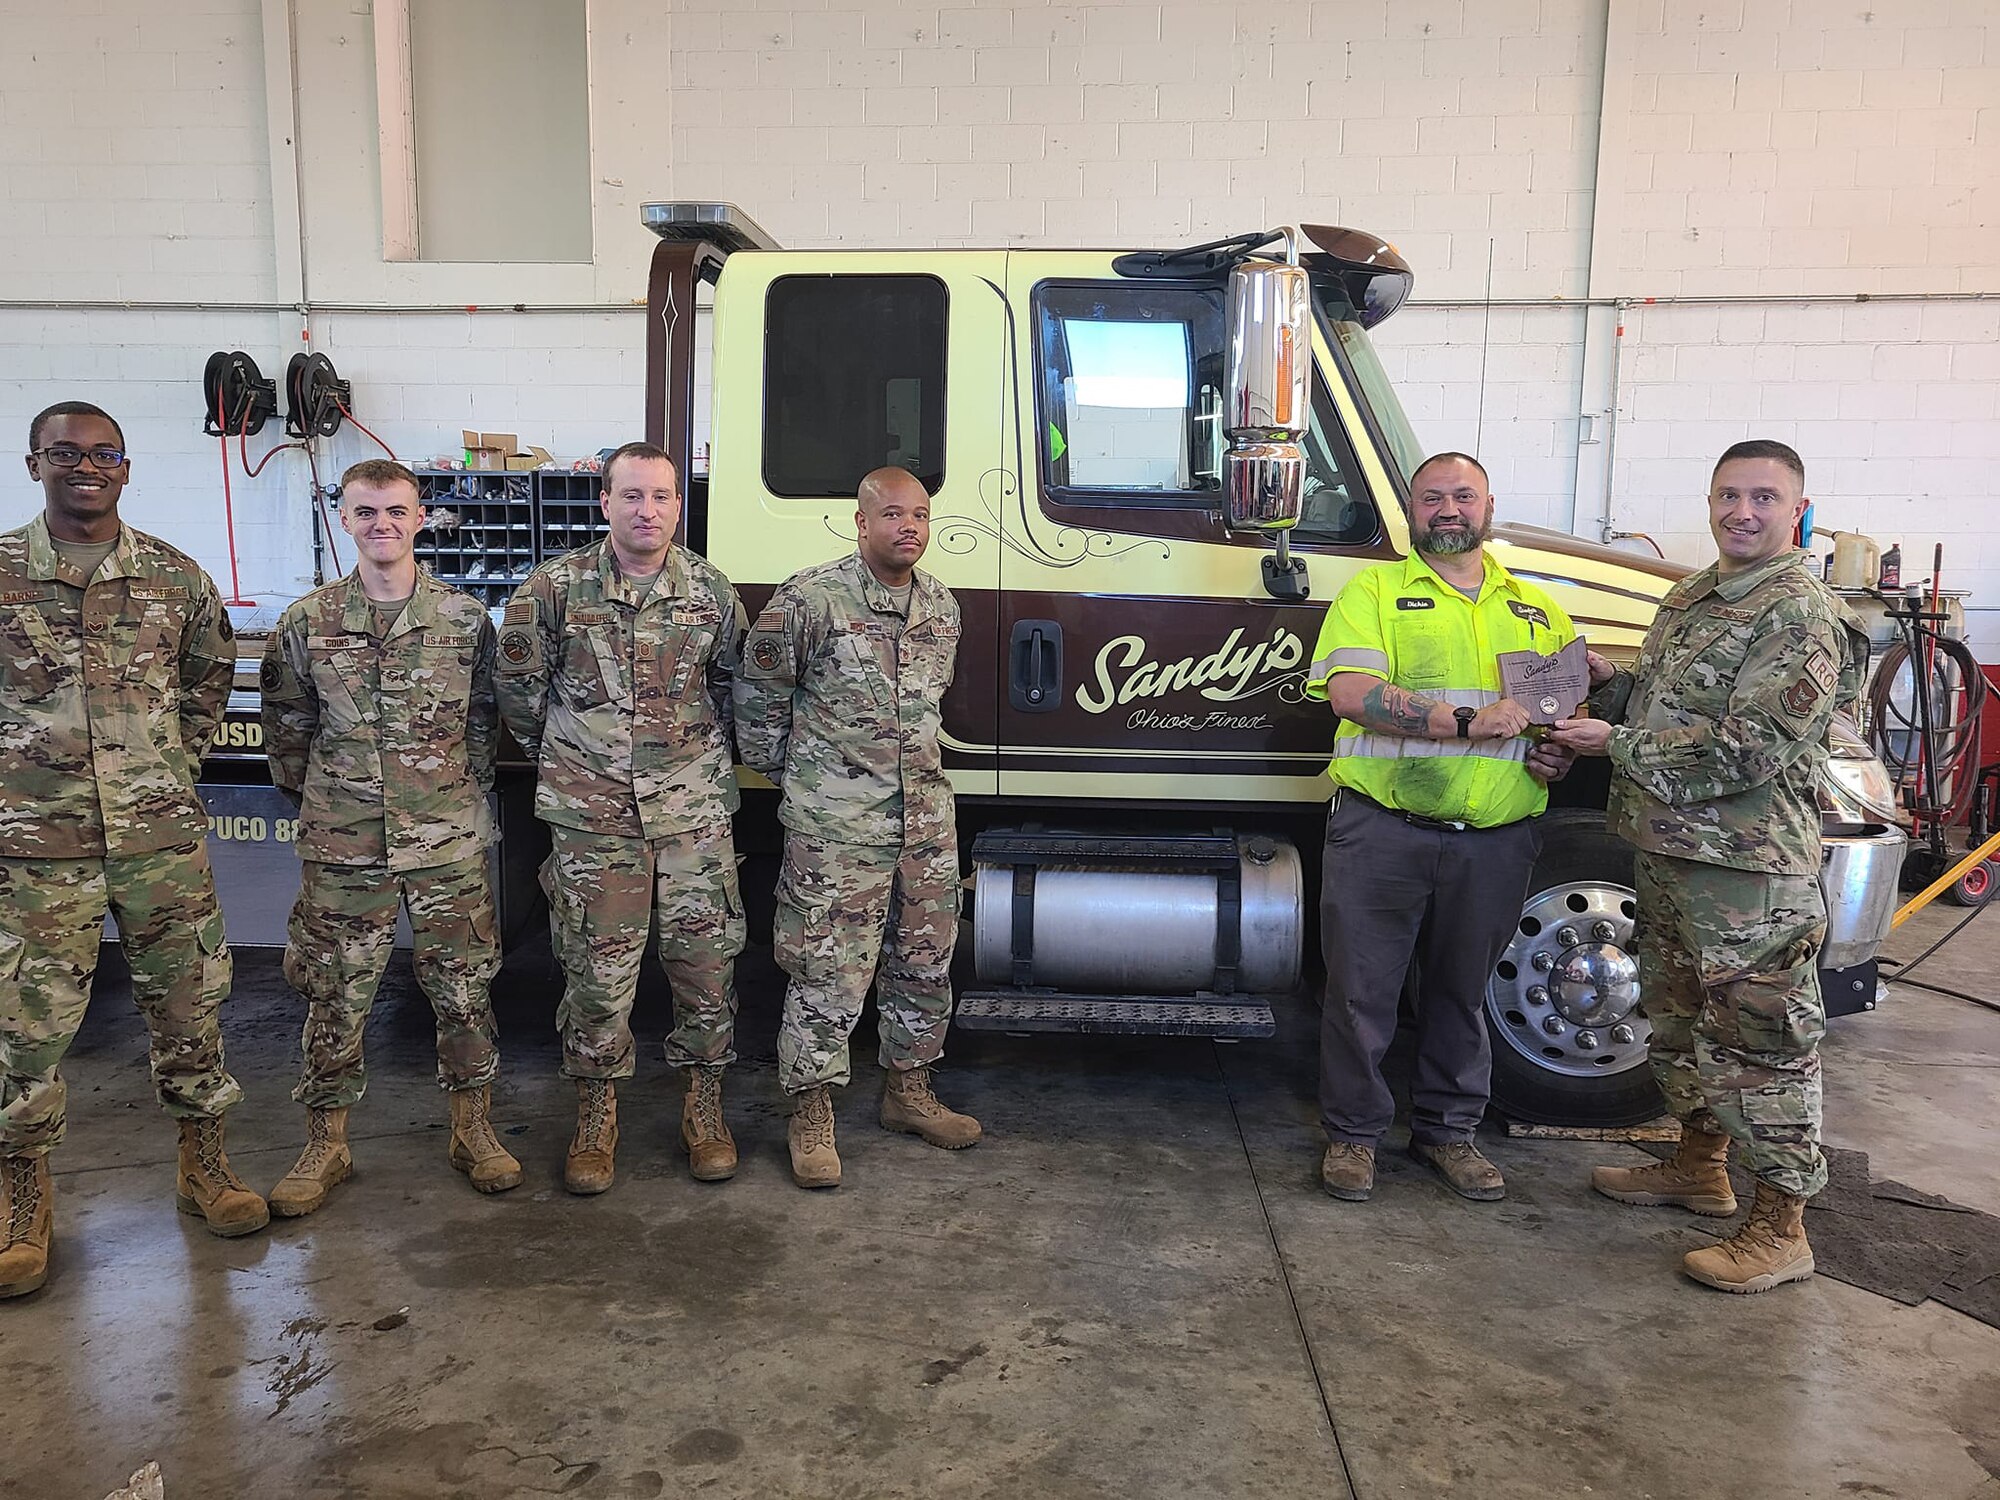 Lt. Col. Brian Eichers, 445th Logistics Readiness Squadron commander, presents a plaque to Sandy’s Towing and Recovery during the September unit training assembly for their support of the squadron. Sandy’s Towing and Recovery established a program with LRS back in 2019 to provide hands-on training to LRS Airmen. To date, the company has provided training for 12 operators, conducted 20 hours of training, executed 12 core tasks directly related to their Career Field Education and Training Plan and accomplished upgrade training.

The Airmen have learned about the different types of wreckers and recovery vehicles, operational safety, recovery equipment, caging and uncaging air brakes, techniques and use of a tow bar and wheel lift. They’ve also been shown overturned vehicles, recovery of disabled vehicles, loading onto a flatbed truck, straight towing and wheel removal (single and dual).